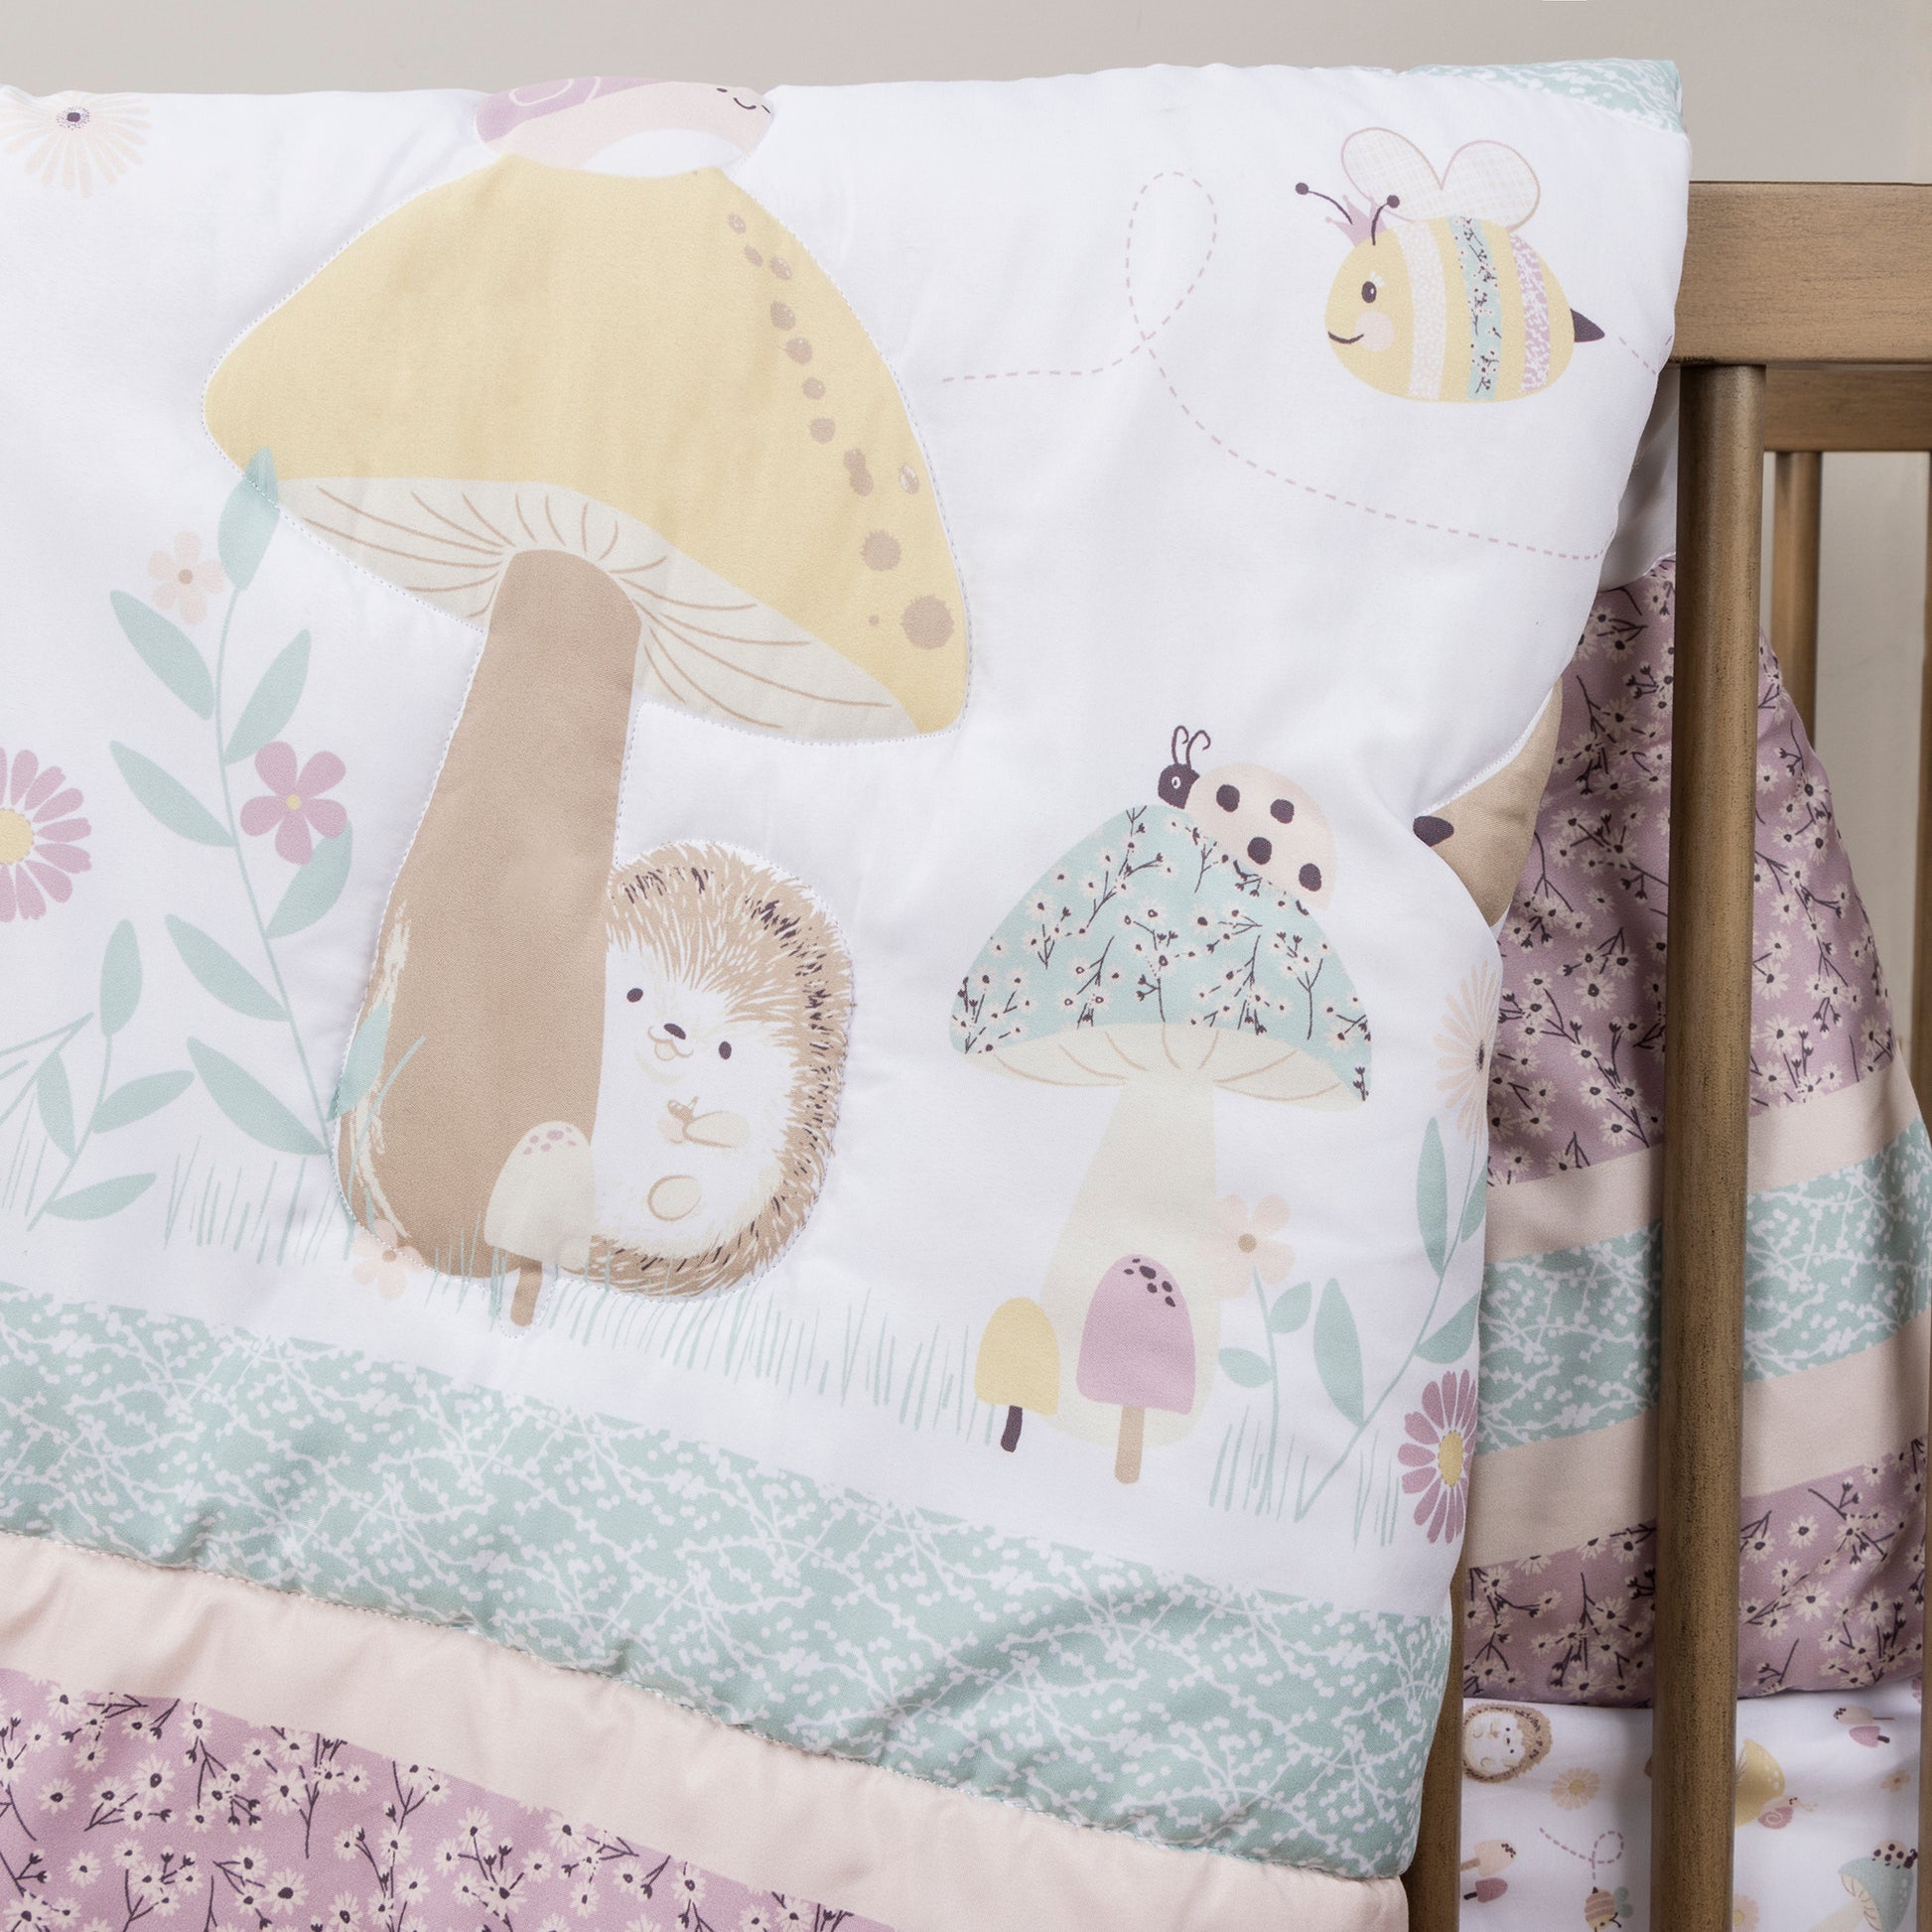  Enchanted Garden 4 Piece Crib Bedding Set by Sammy & Lou®; stylized fabric detail image featuring woodland animals and mushrooms